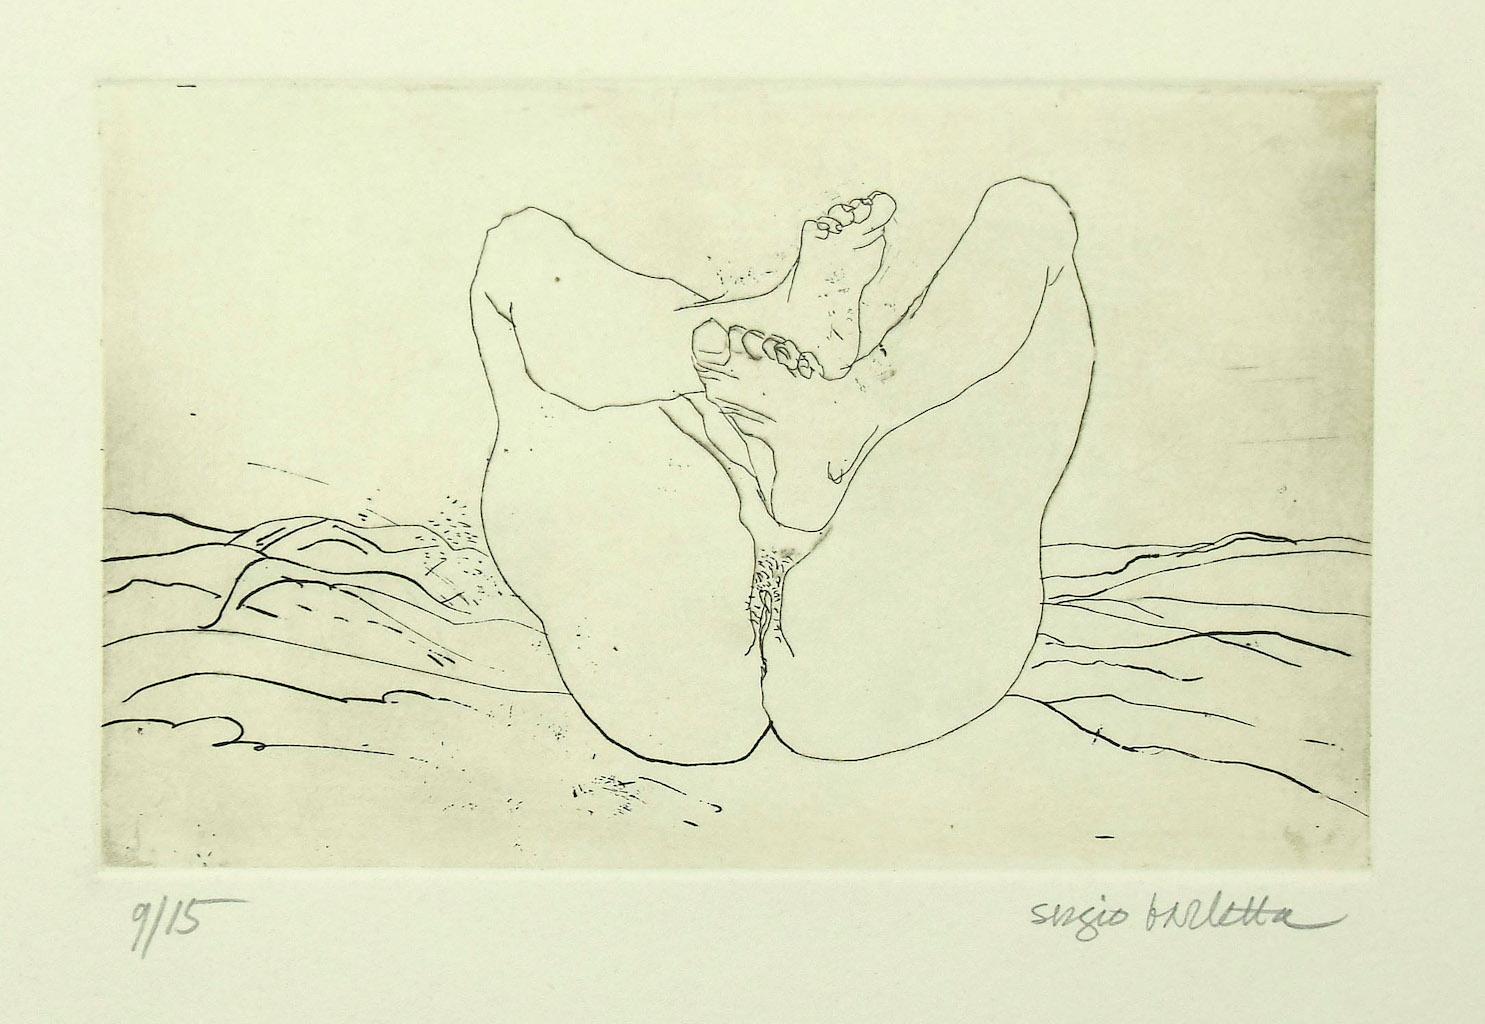 Nude is an original etching realized by Sergio Barletta. 

Hand-signed on the lower right in pencil. Numbered, edition of 9/15 prints, on the lower left in pencil.

In very good conditions.

Sheet Dimension:35 x 50.5 cm

The artwork represents a